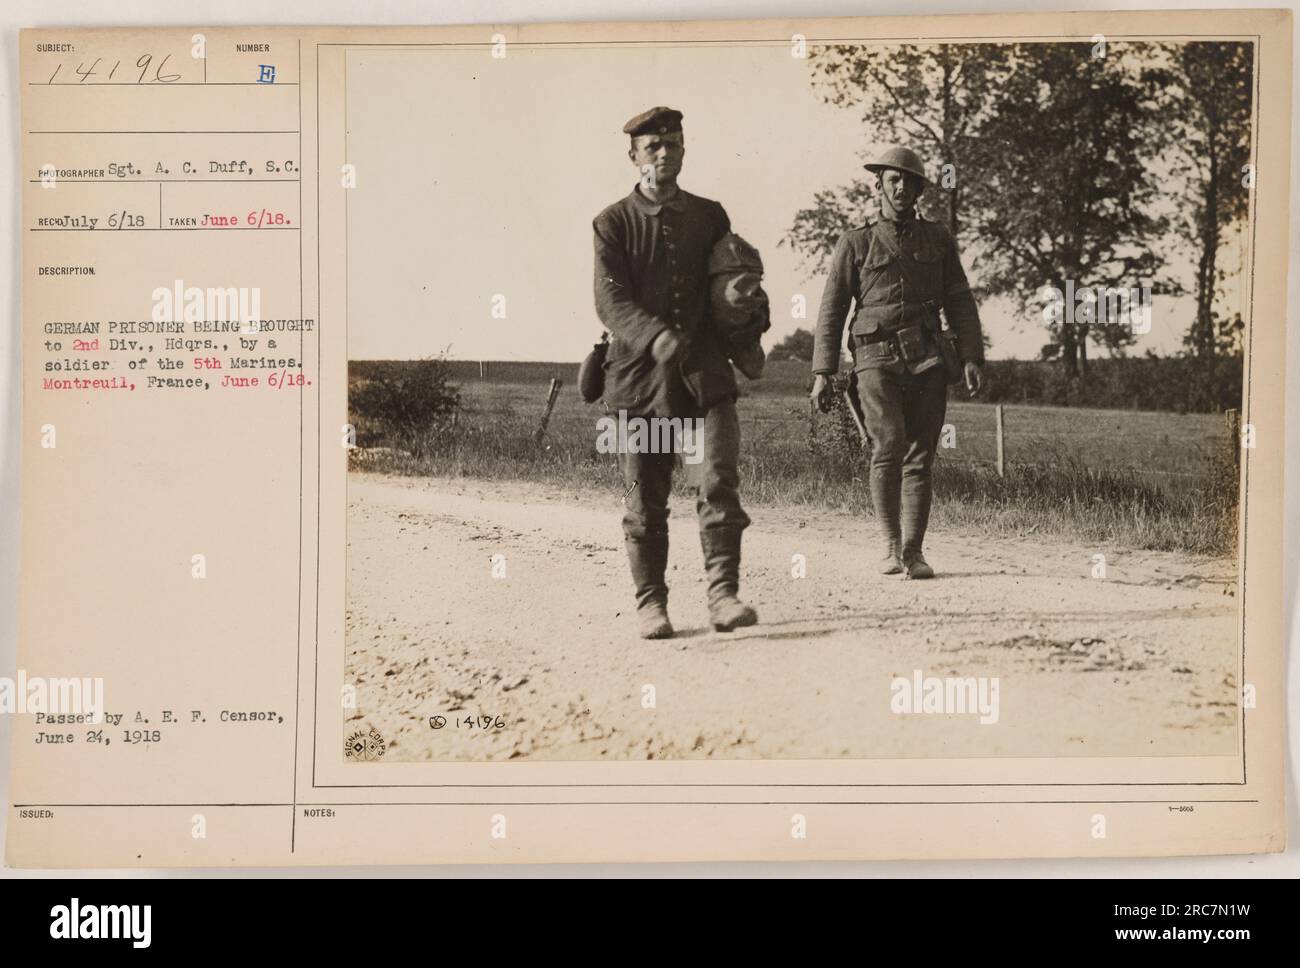 A German prisoner being escorted by a soldier of the 5th Marines to the 2nd Division headquarters in Montreuil, France on June 6, 1918. This photograph, taken by Sgt. A. C. Duff, shows the capture and transportation of enemy prisoners during World War One. Stock Photo